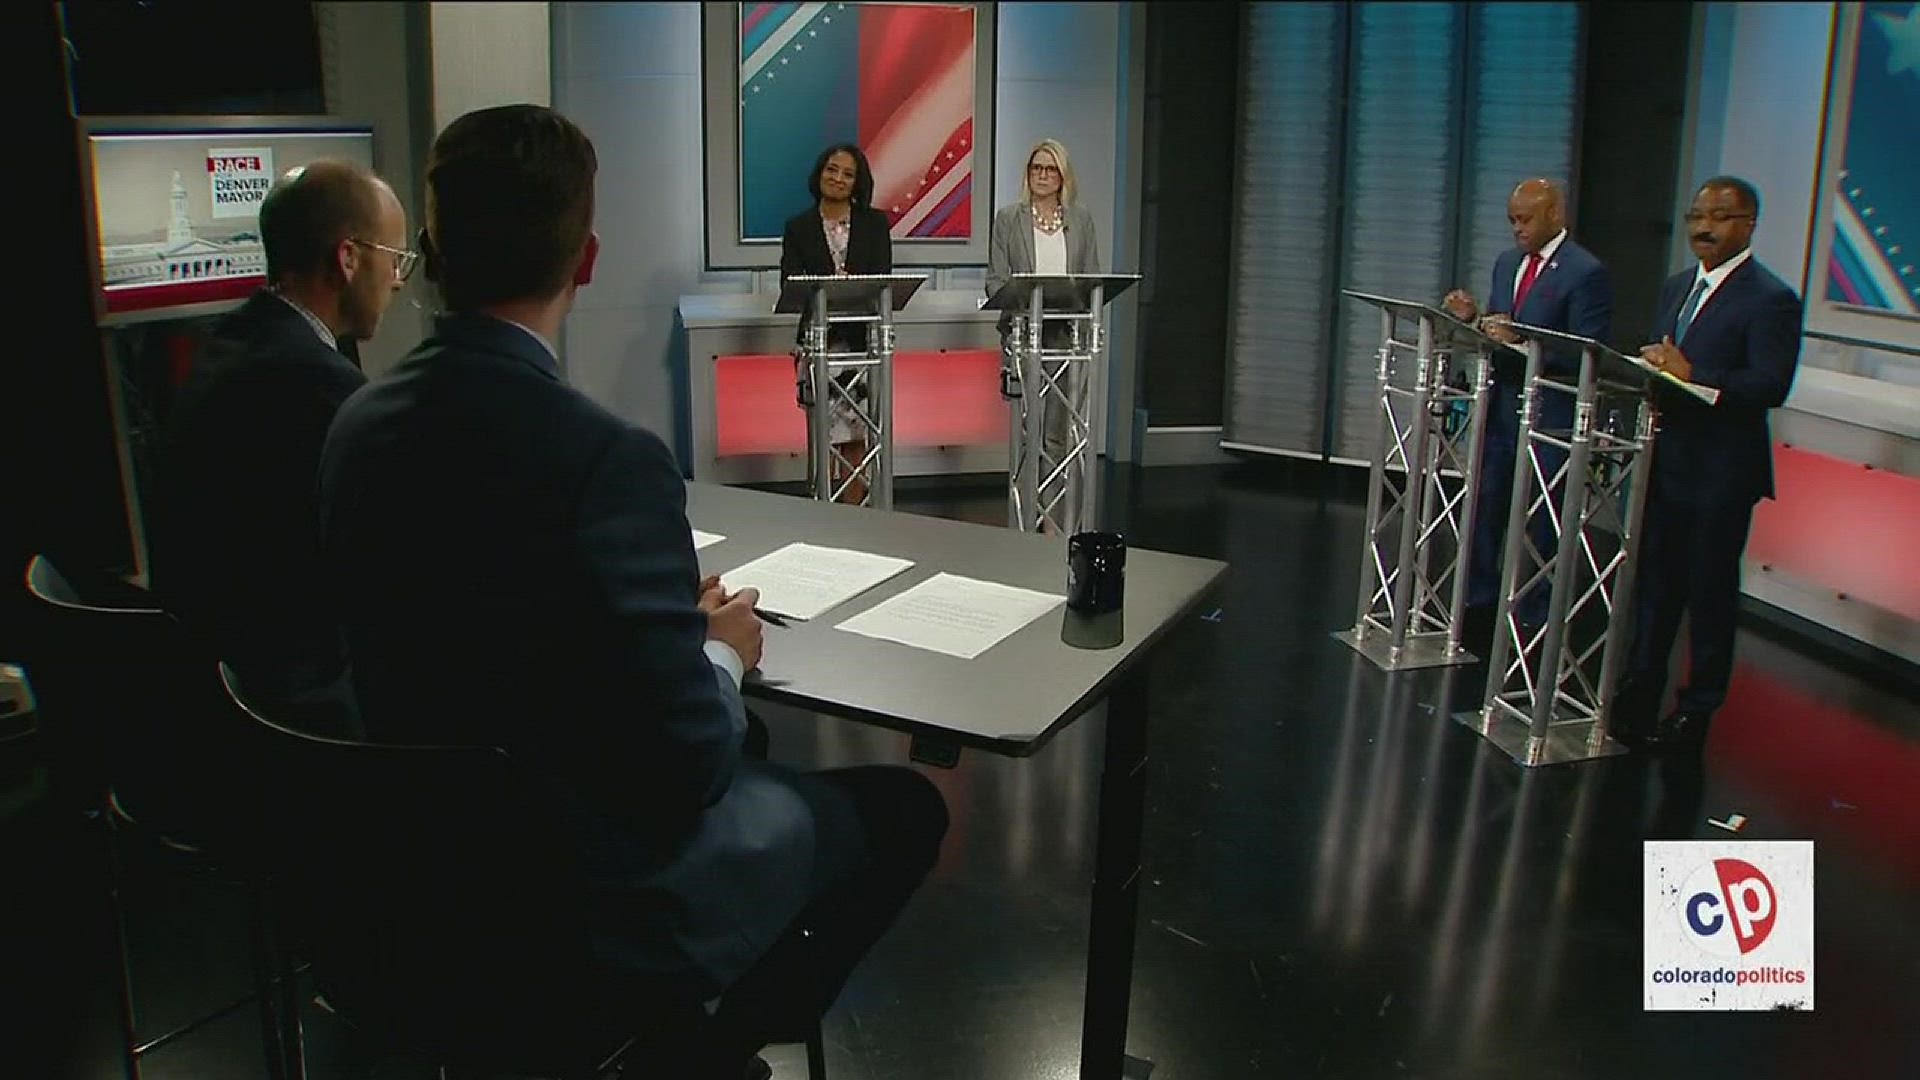 Incumbent Michael Hancock, Lisa Calderon, Jamie Giellis and Penfield Tate III gave their closing statements at the conclusion of the live 9NEWS mayoral debate.